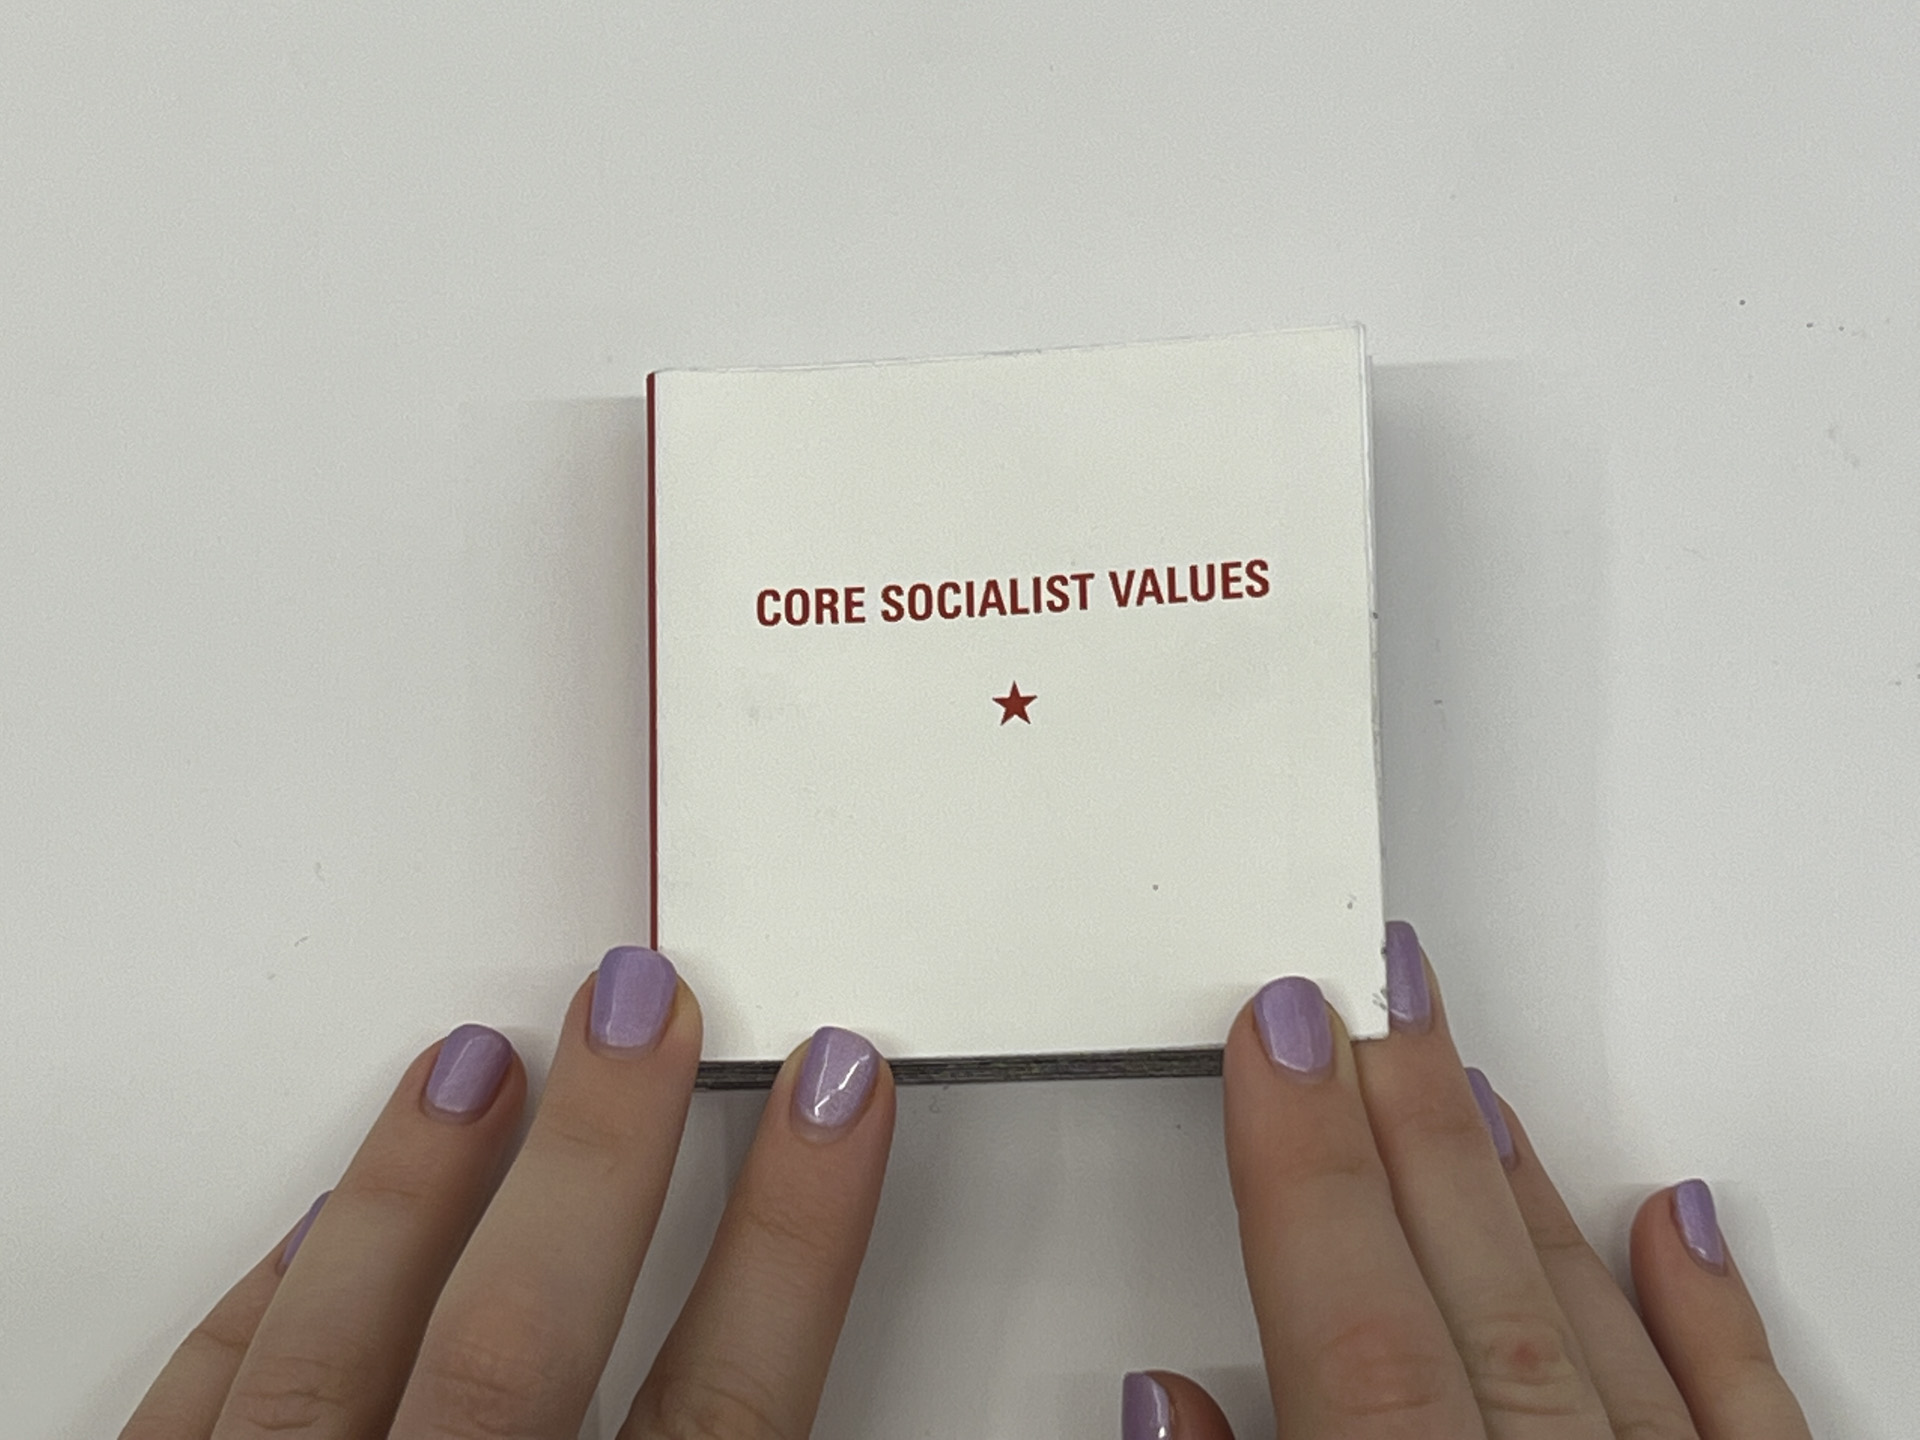 book cover witbh text of "core socialist values"